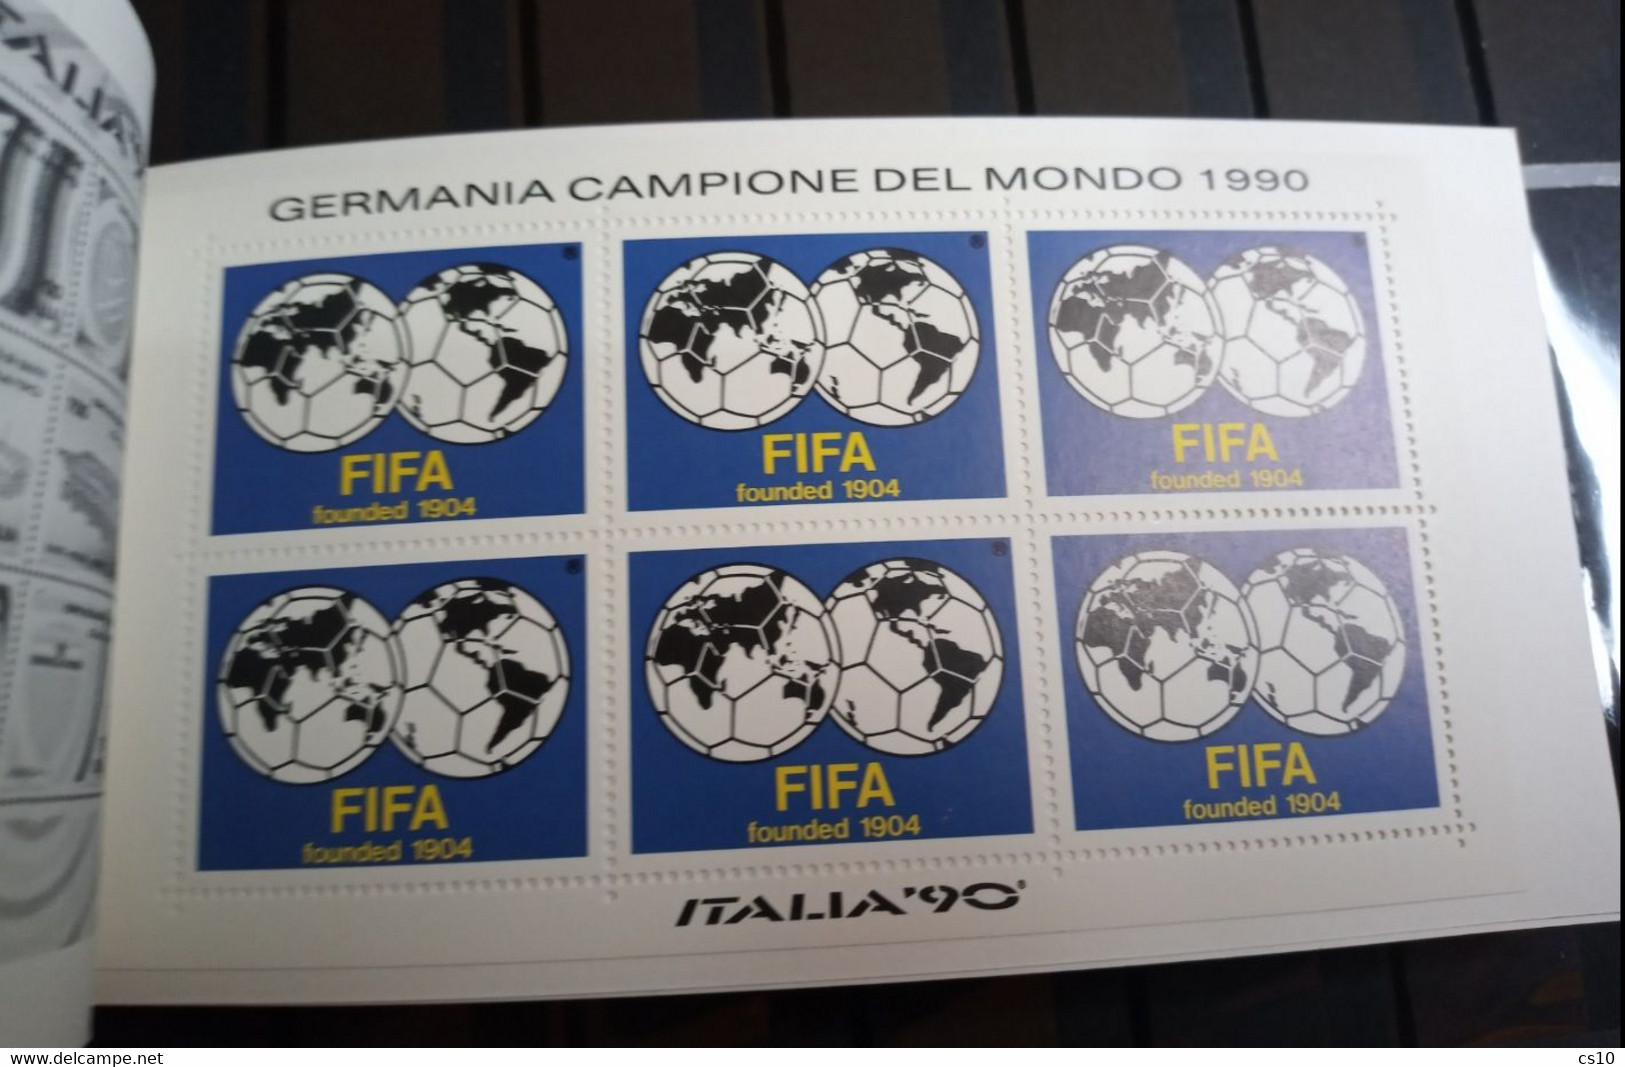 Italia '90 FIFA World Cup - Germany Champion / Winner - Official Celebrative Booklet W/ Stamps + Football Labels - Carnets